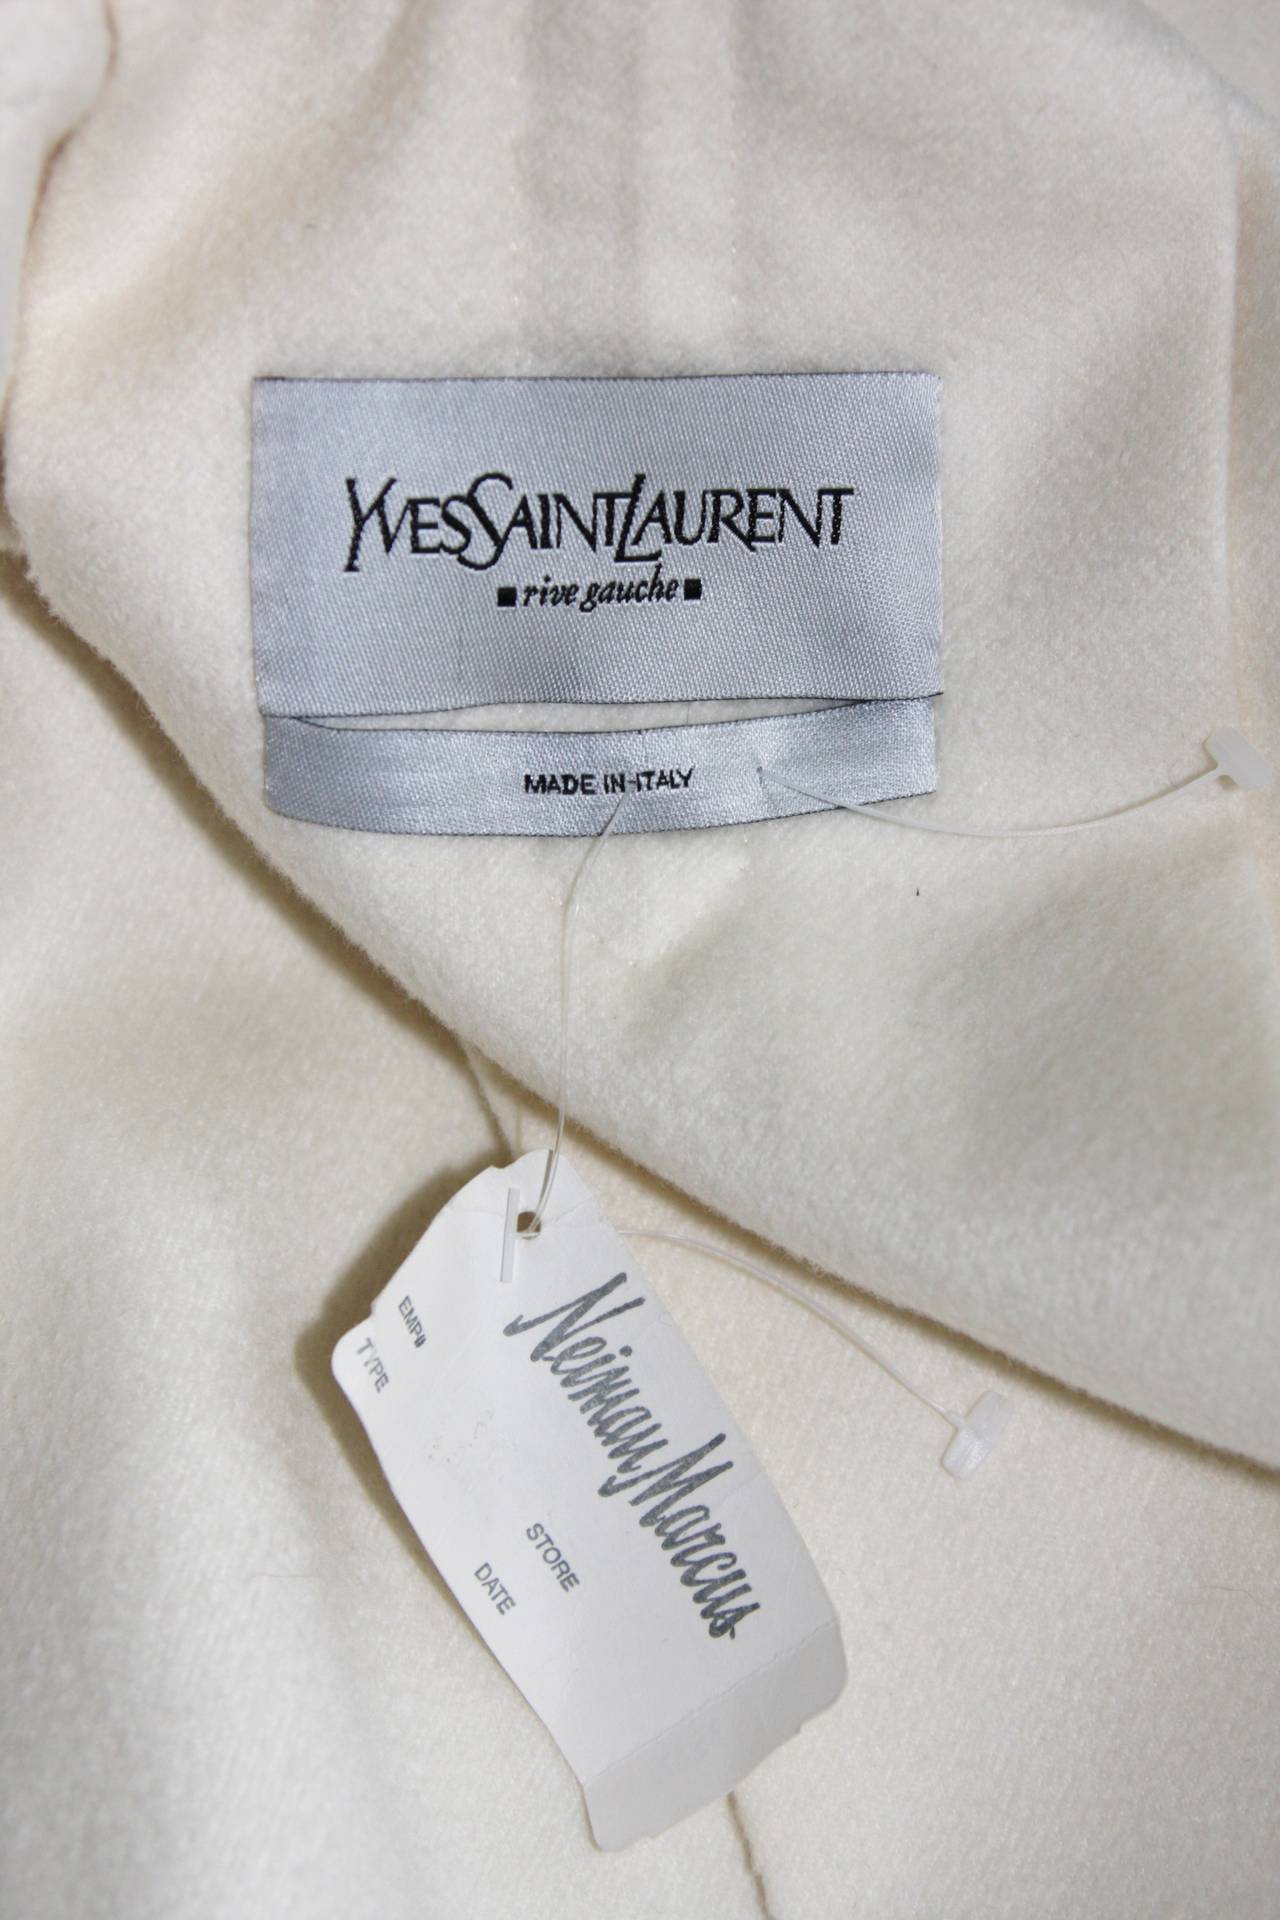 Yves Saint Laurent Cream/White Cashmere Belted Trench Coat NWT For Sale 2